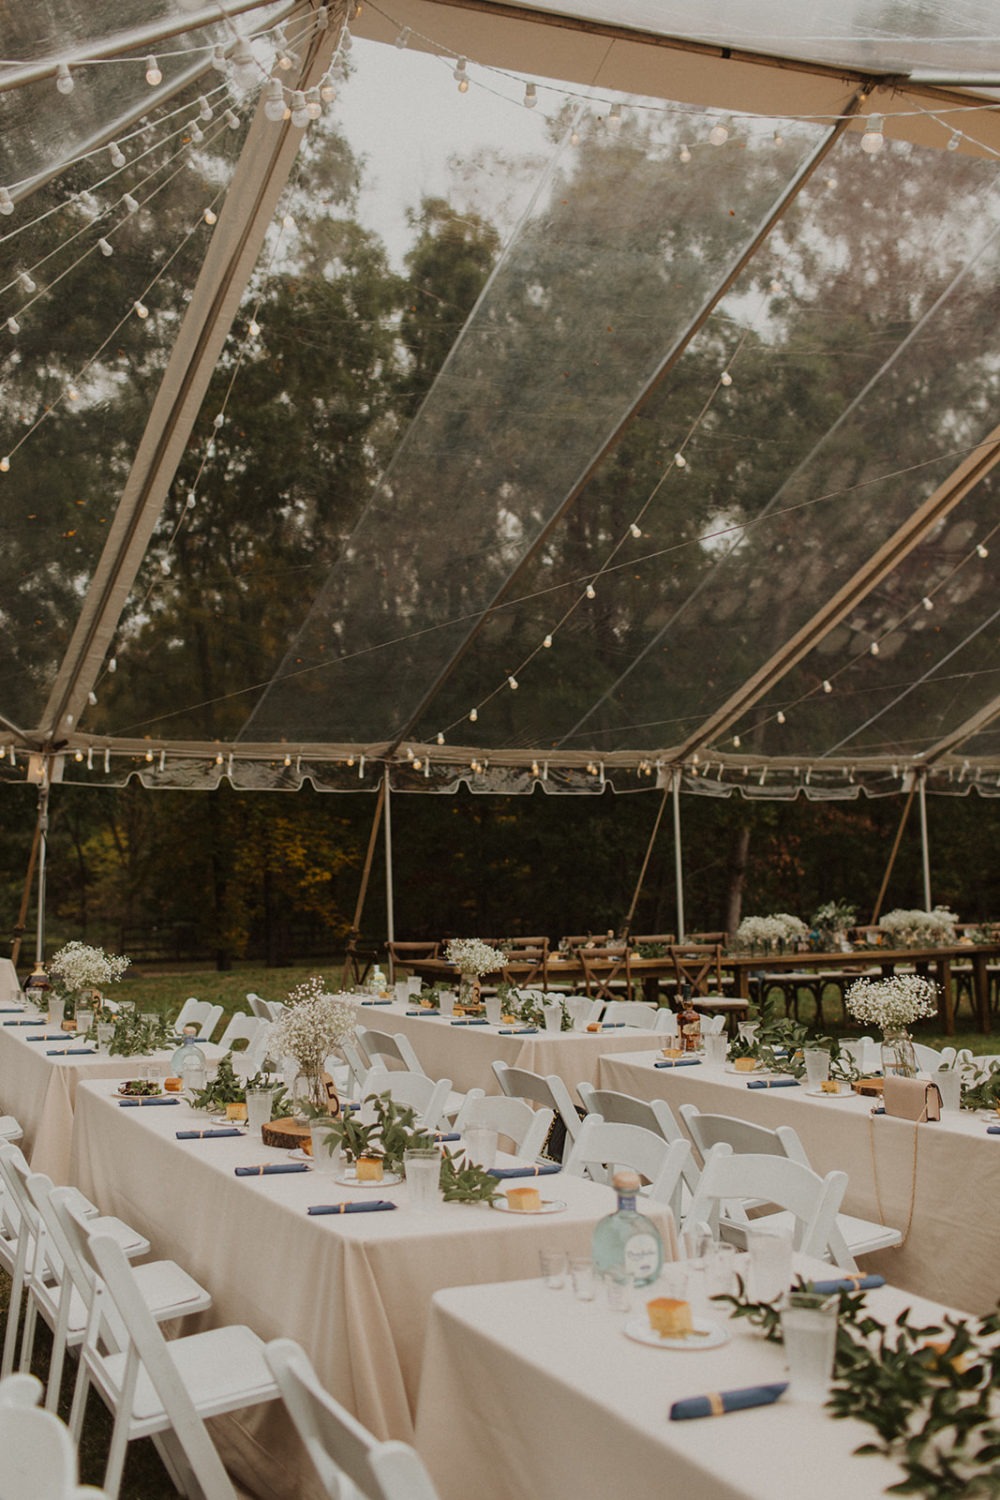 Table settings with floral decor at outdoor wedding reception